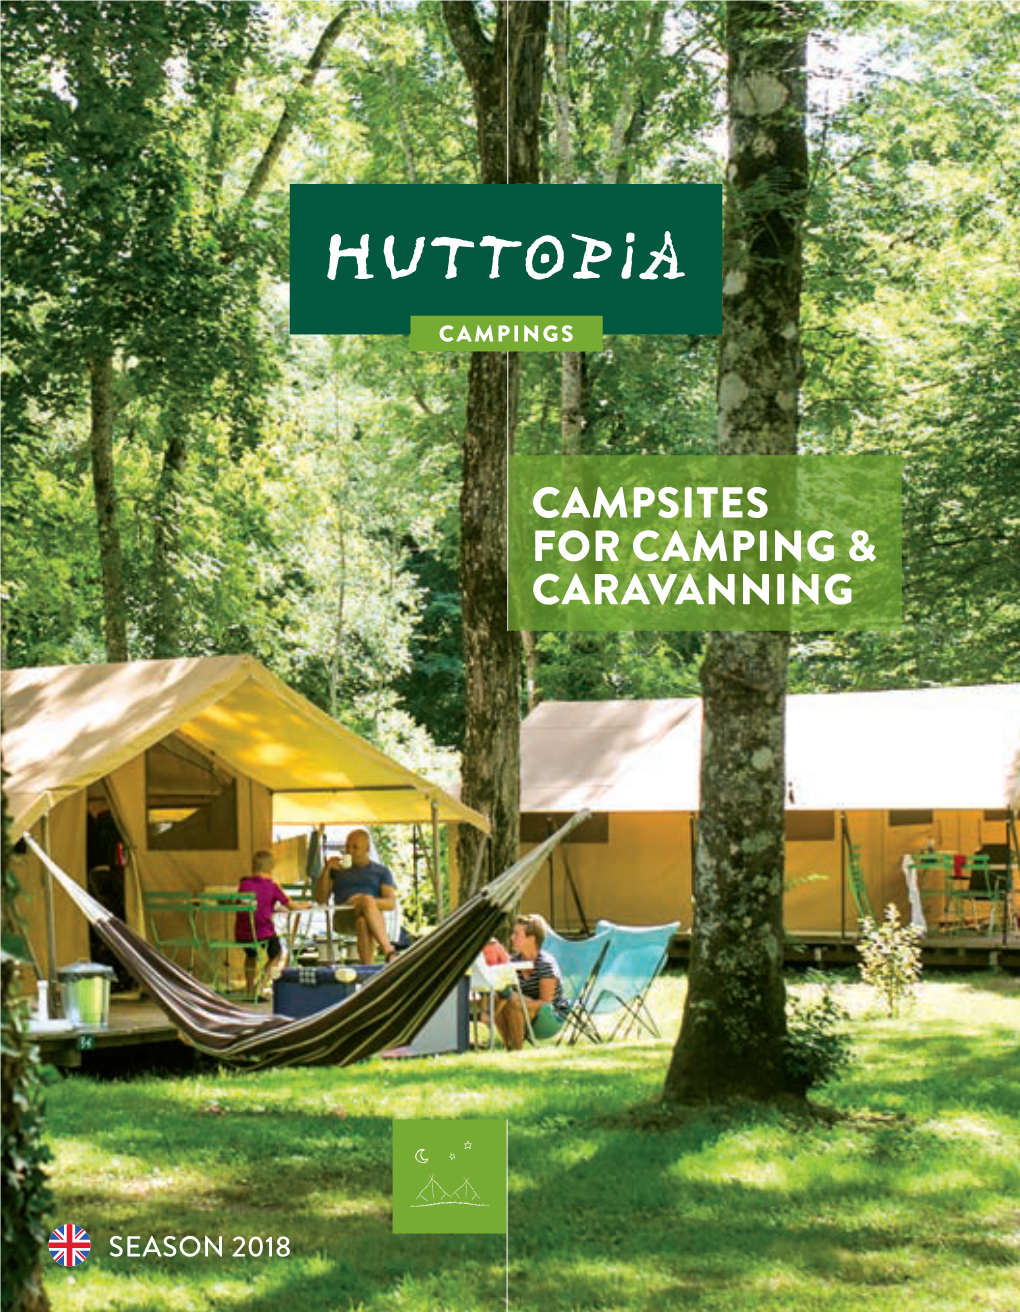 Campsites for Camping & Caravanning